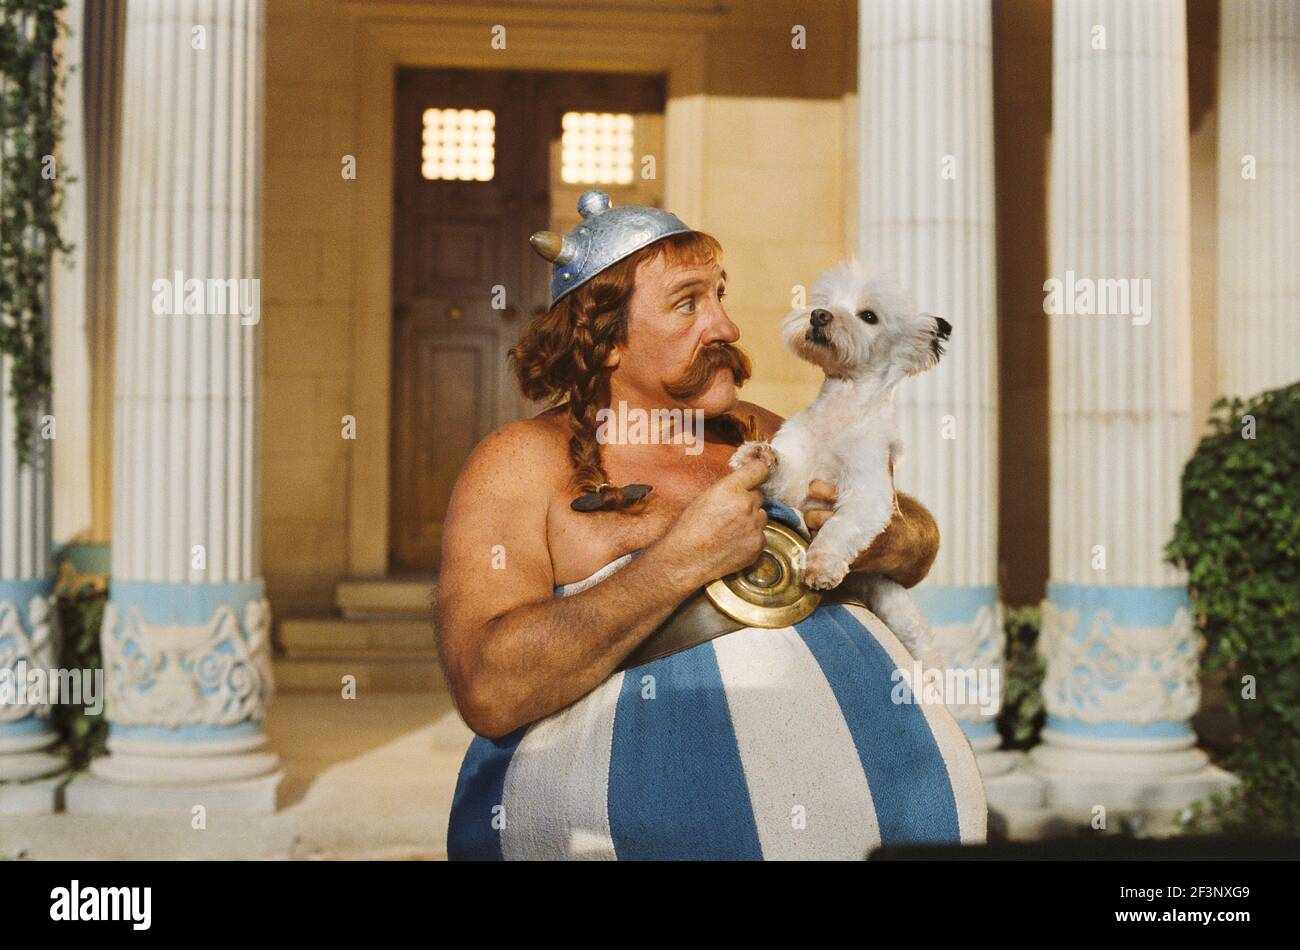 Obelix And Idefix High Resolution Stock Photography and Images - Alamy